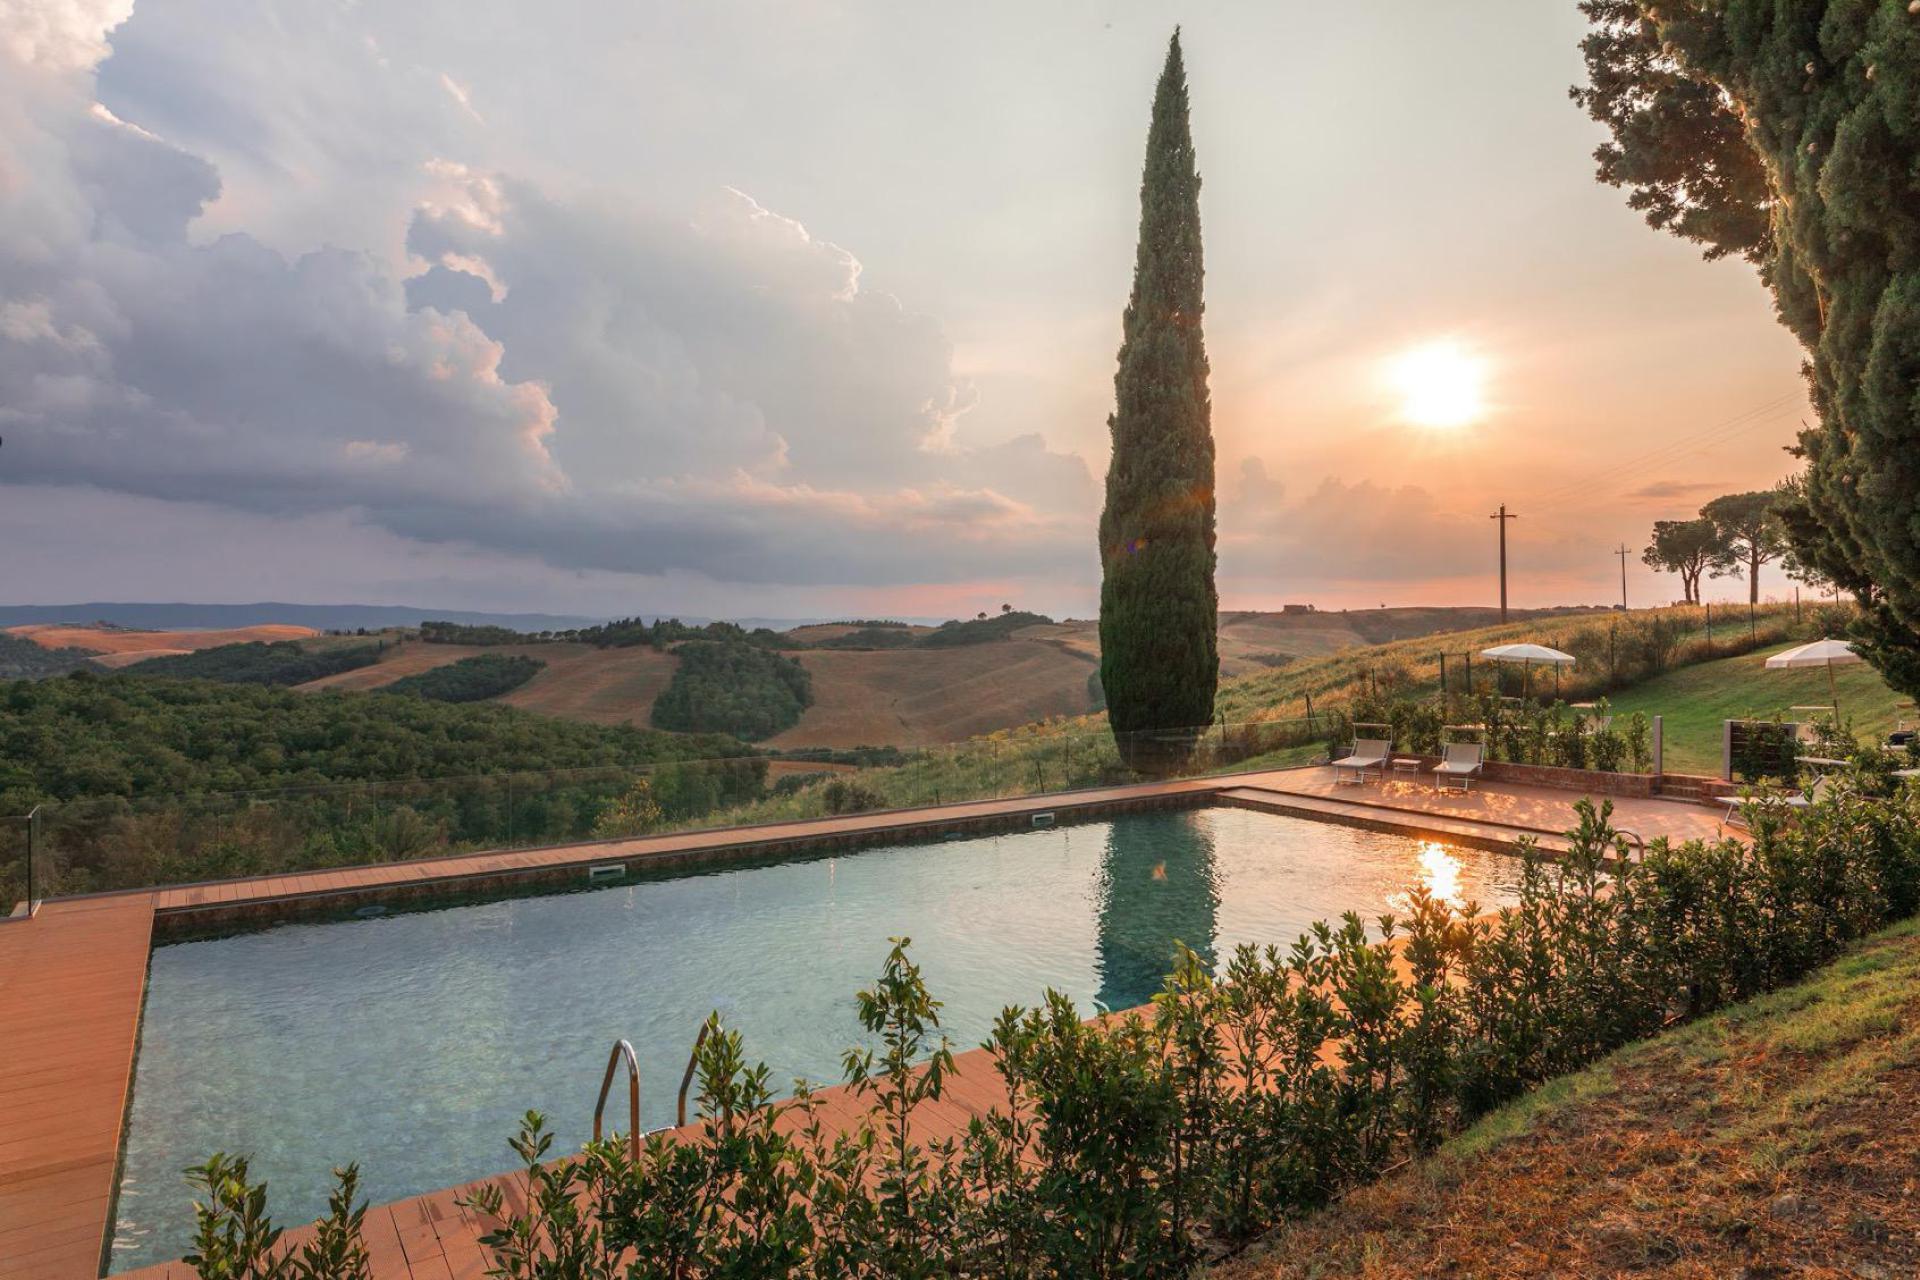 Agriturismo in Tuscany with great views